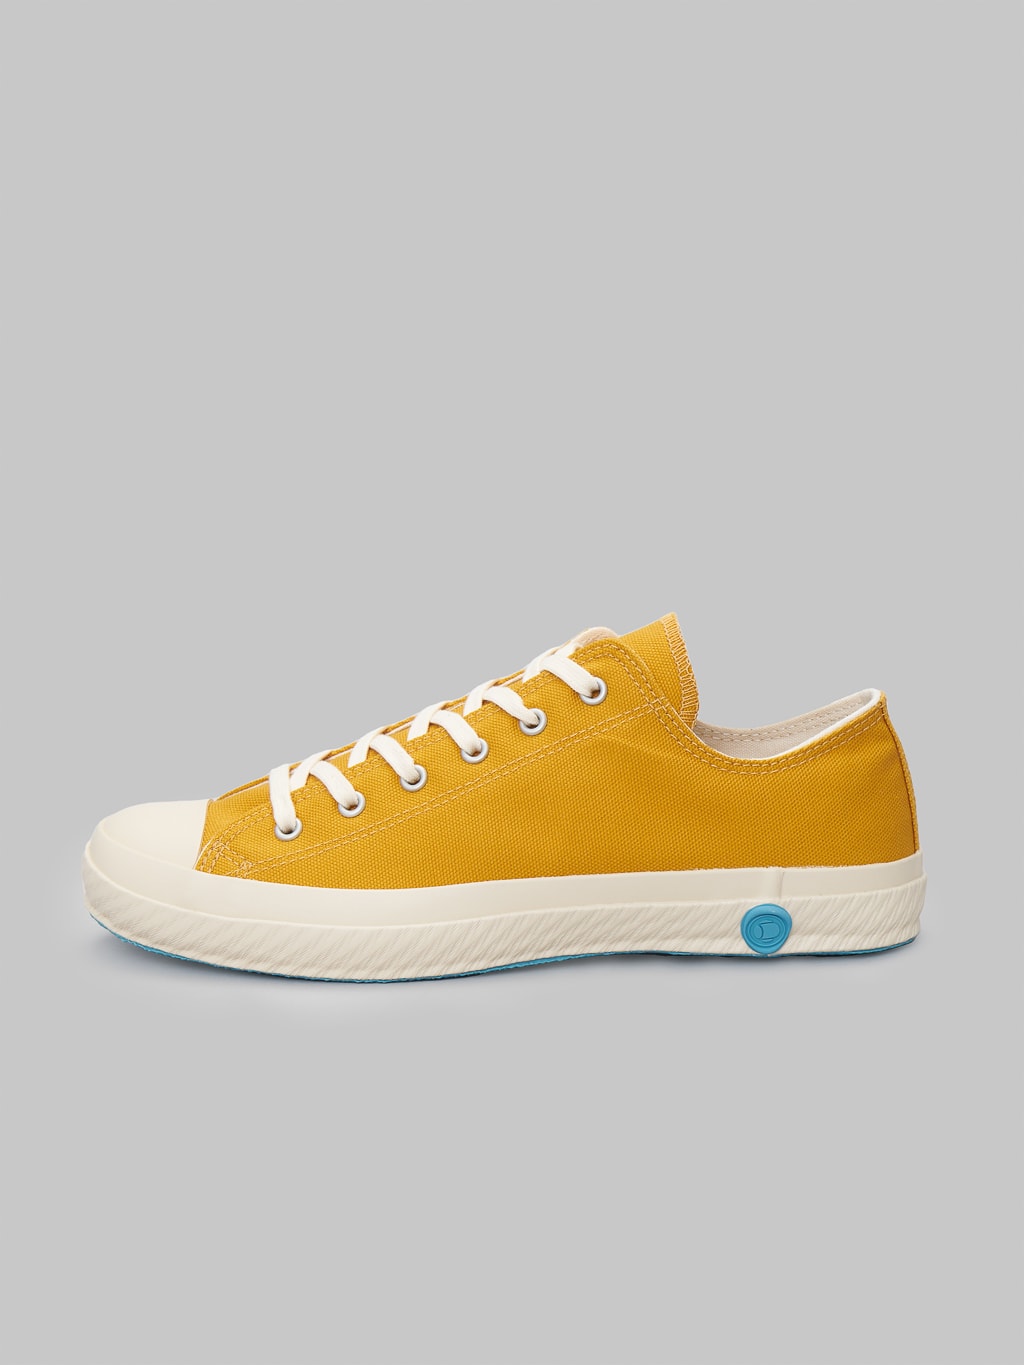 Shoes like pottery low mustard sneakers craftsmanship